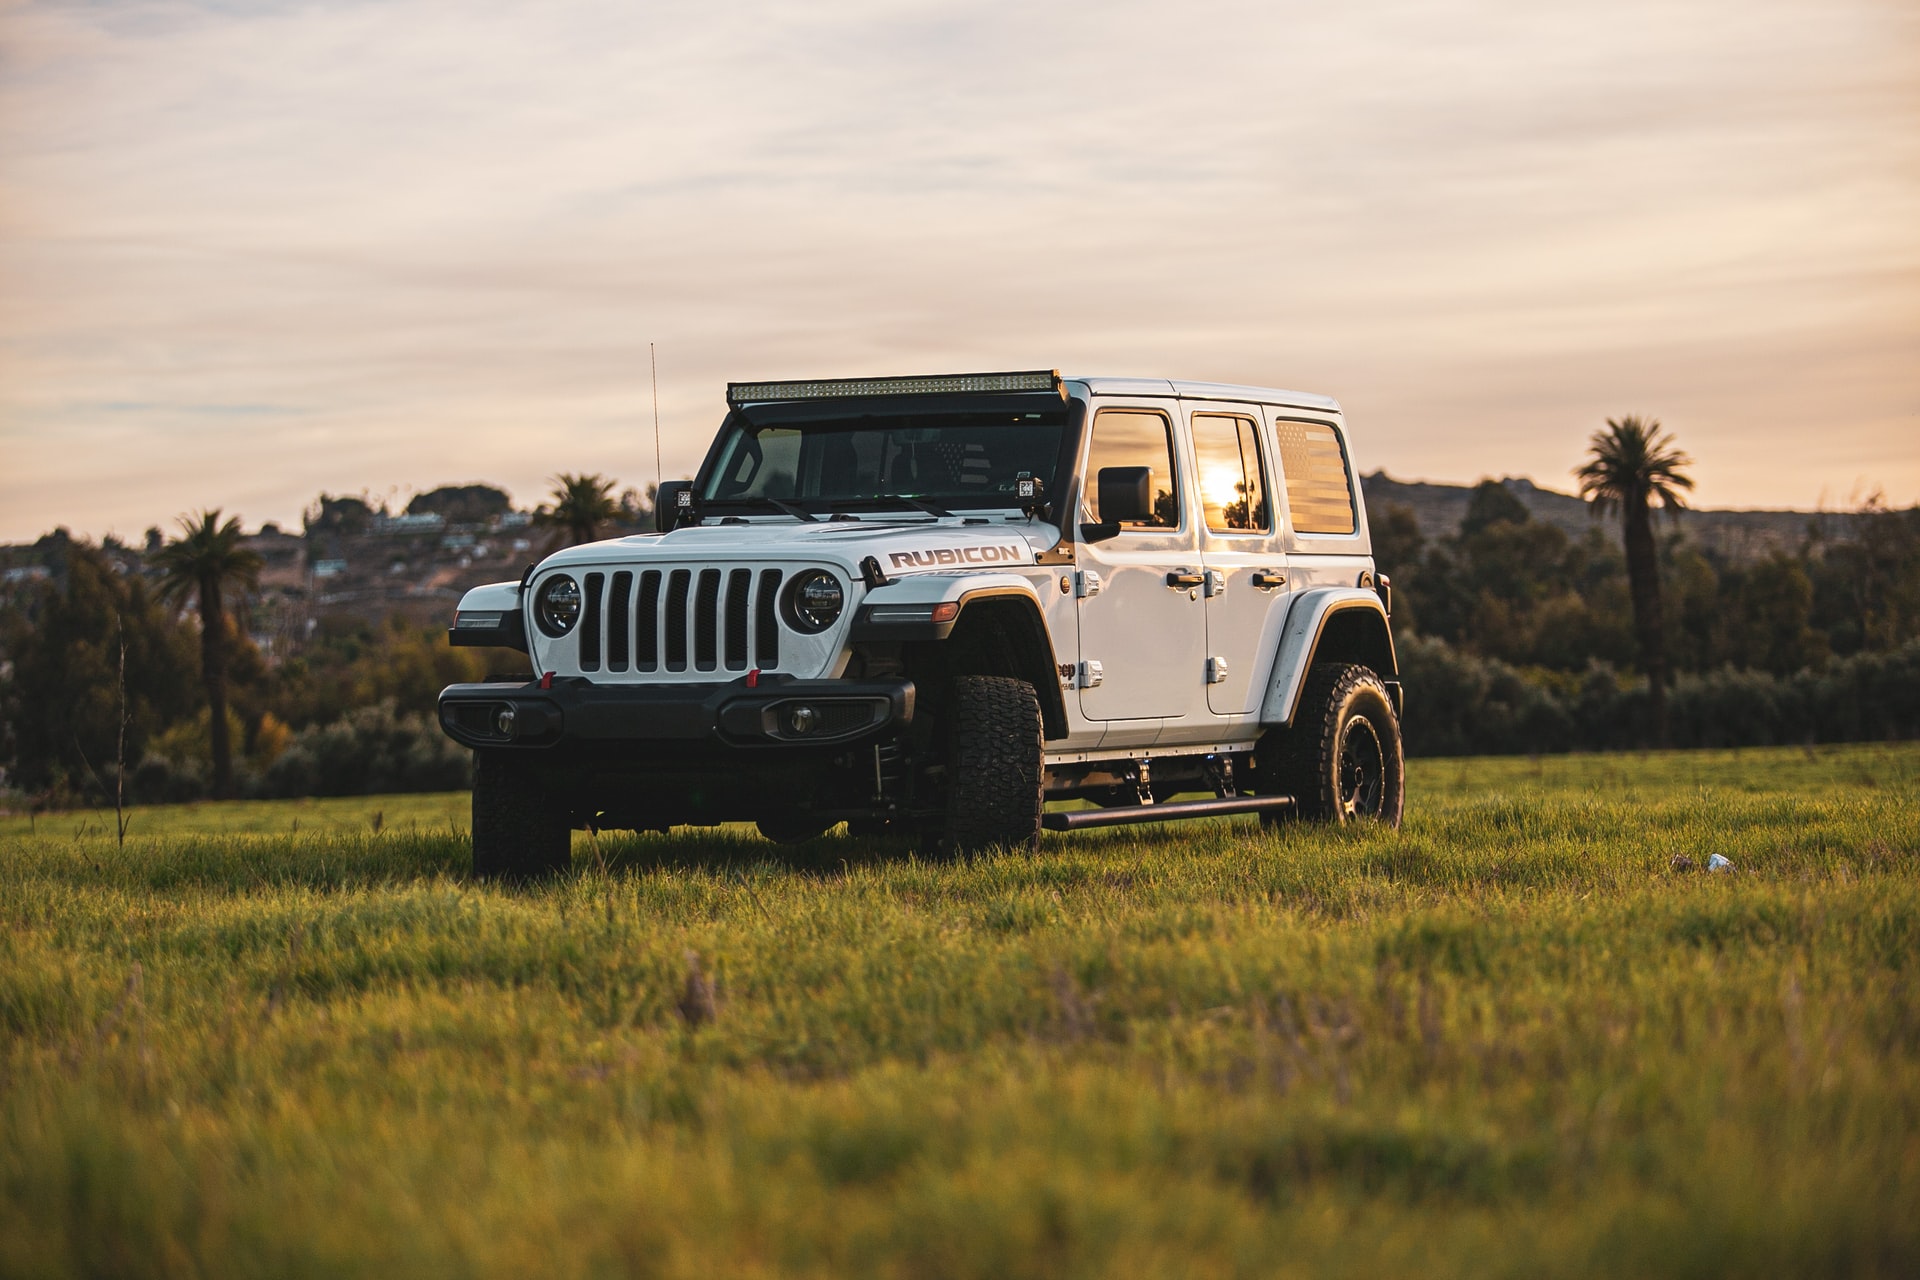 Are Jeep Parts Expensive?